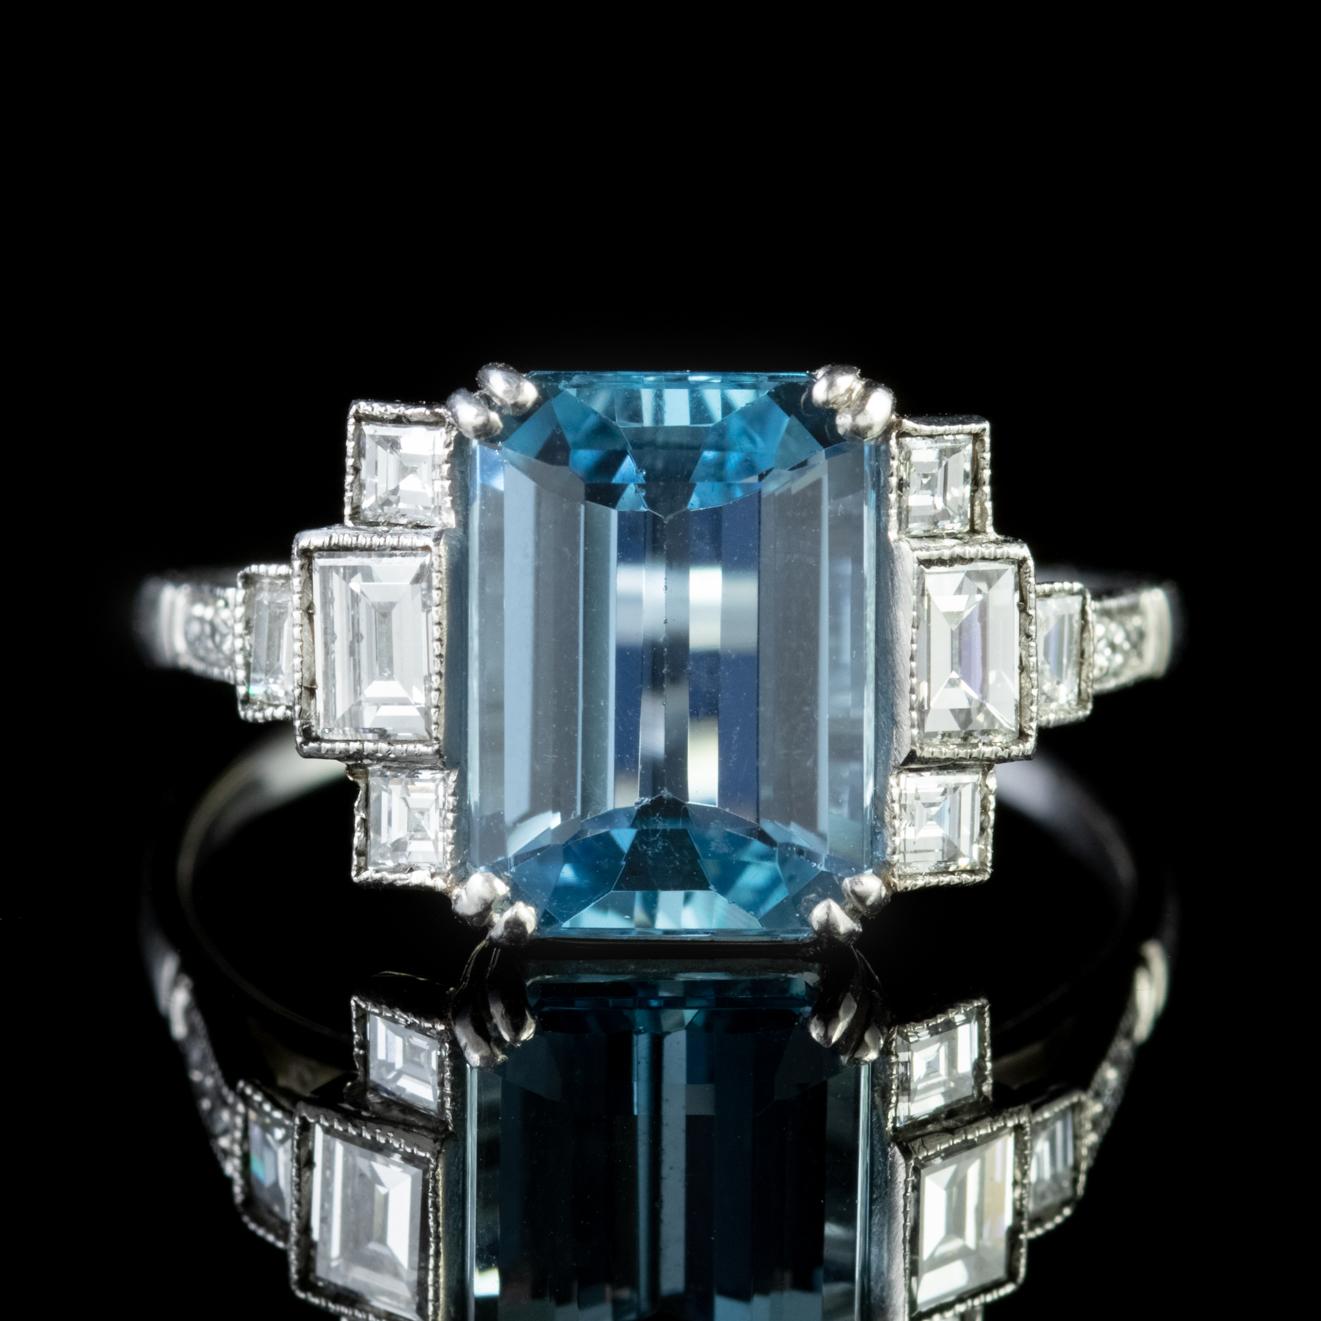 This magnificent genuine Art Deco Aquamarine and Diamond ring boasts an impressive 3.50ct emerald cut Aquamarine flanked by baguette and princess cut Diamonds on each shoulder. The Diamonds are beautiful VS1, H colour stones totalling approx.